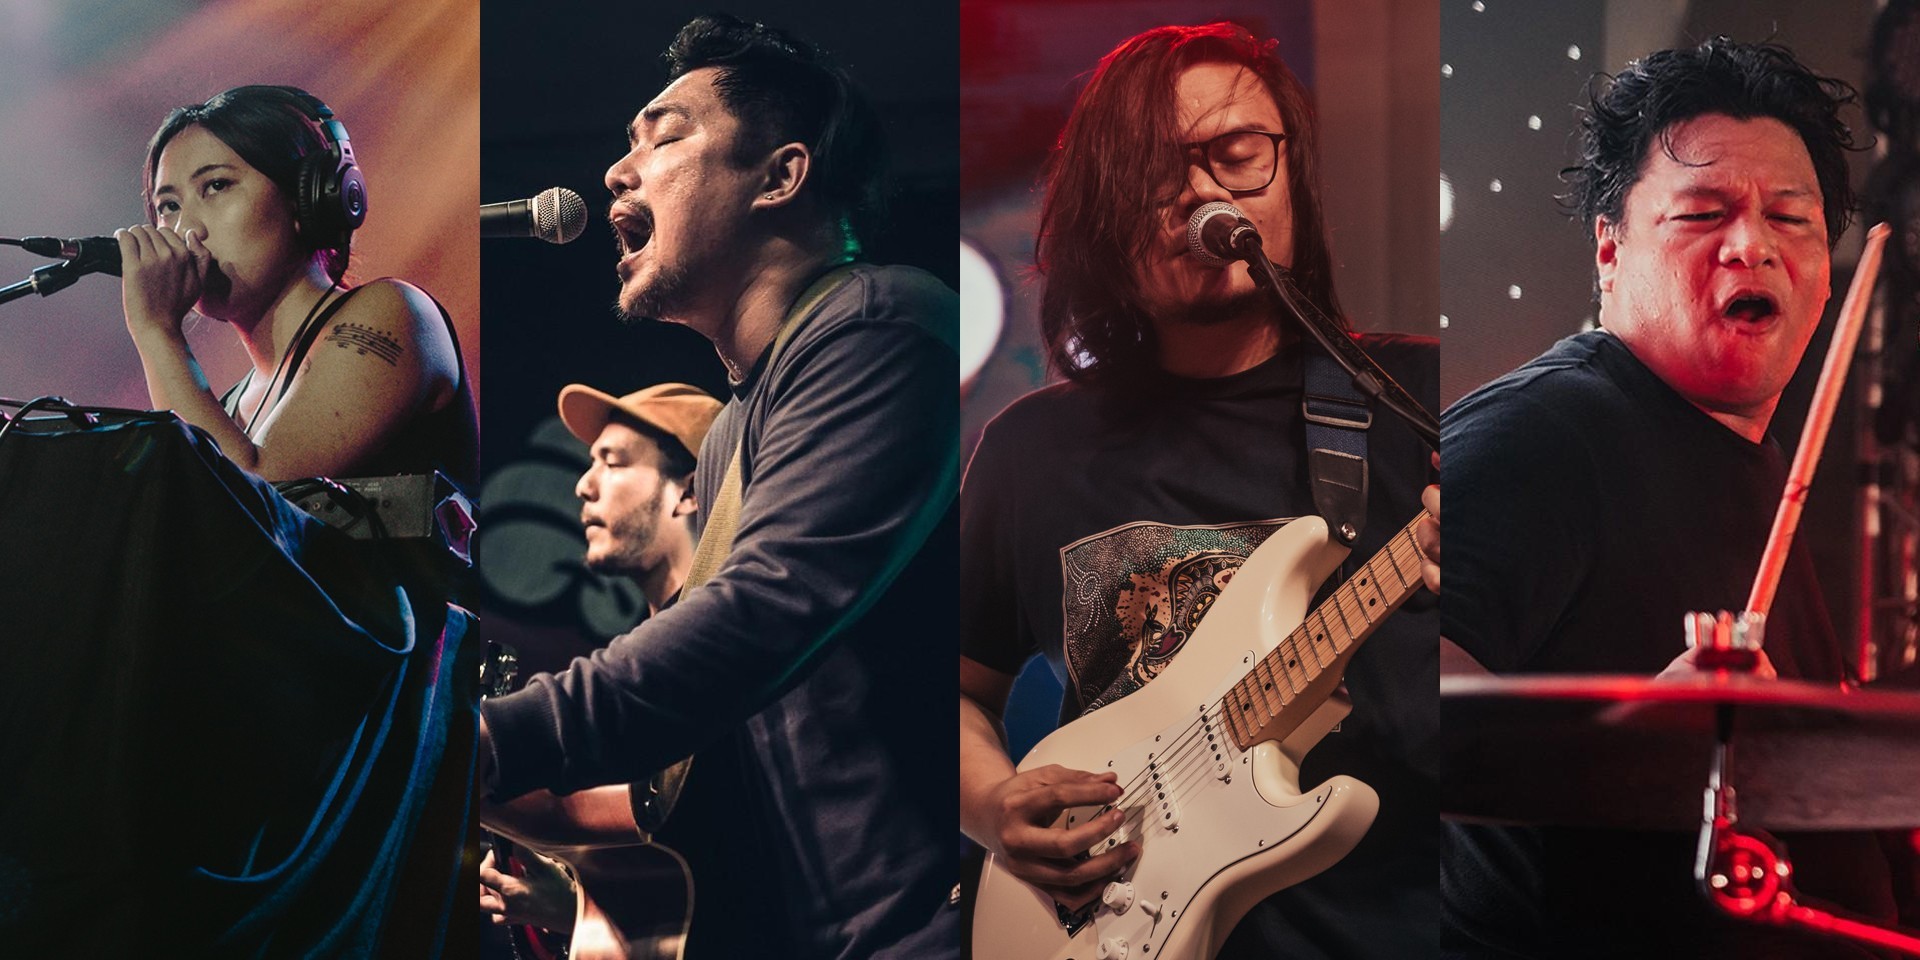 BP Valenzuela, December Avenue, Autotelic, Itchyworms, and more to perform at Cove Manila Music Festival